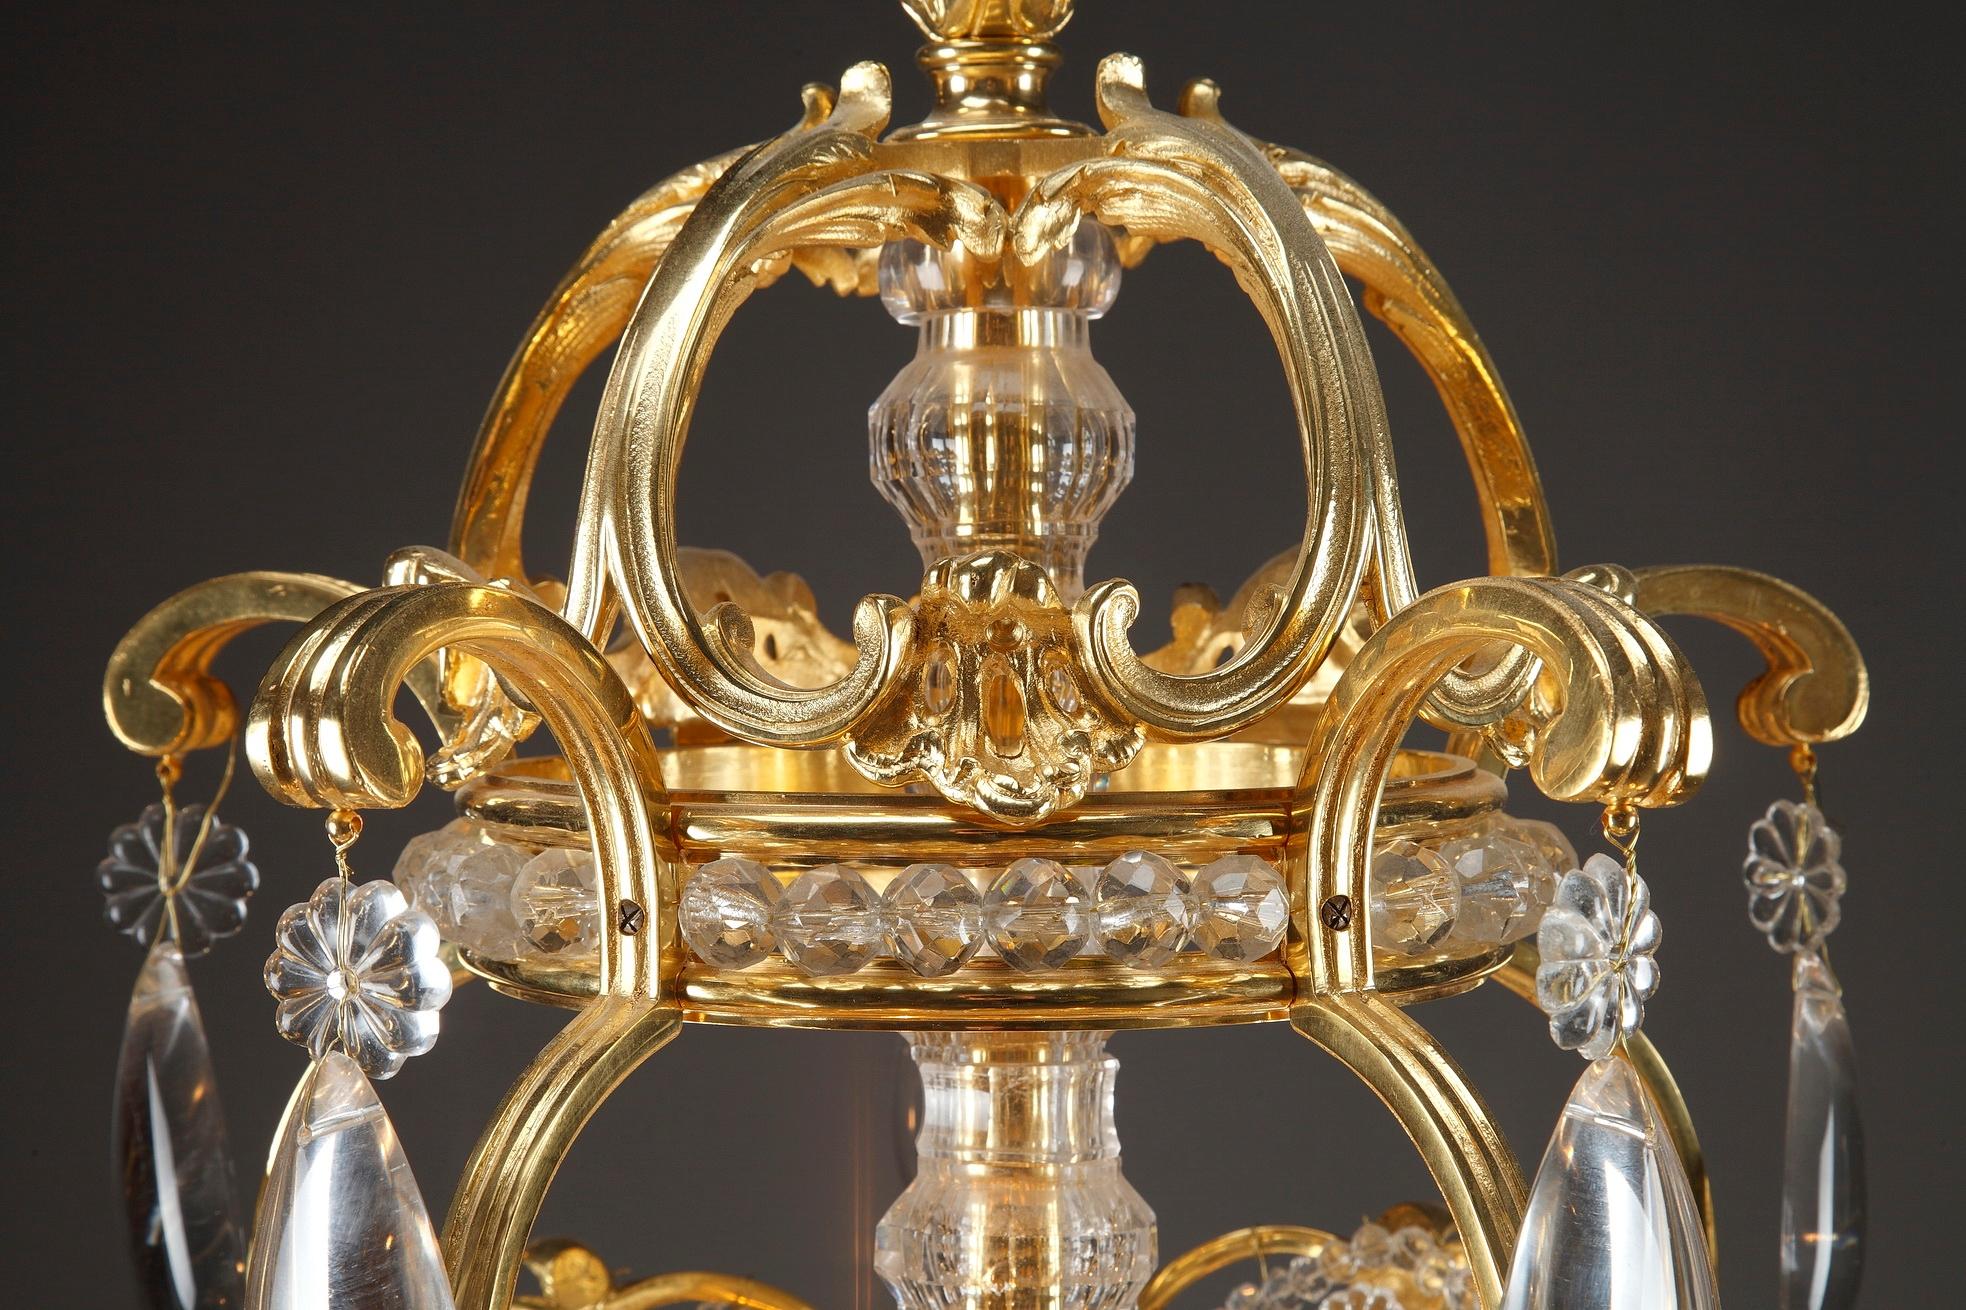 French 19th Century 10-Light Ormolu and Crystal Basket-Shaped Chandelier For Sale